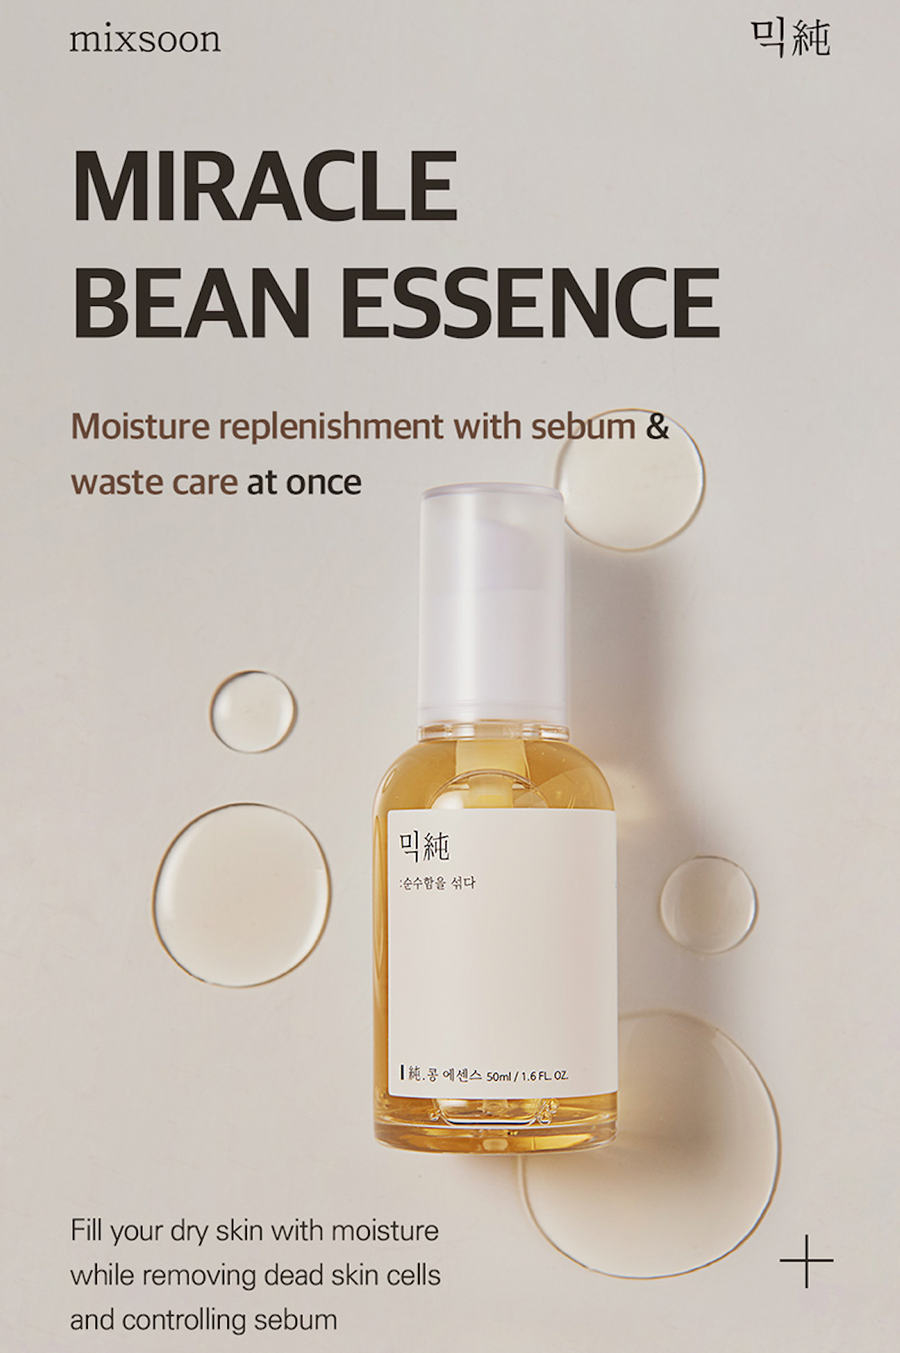 Bean essence by Mixsoon